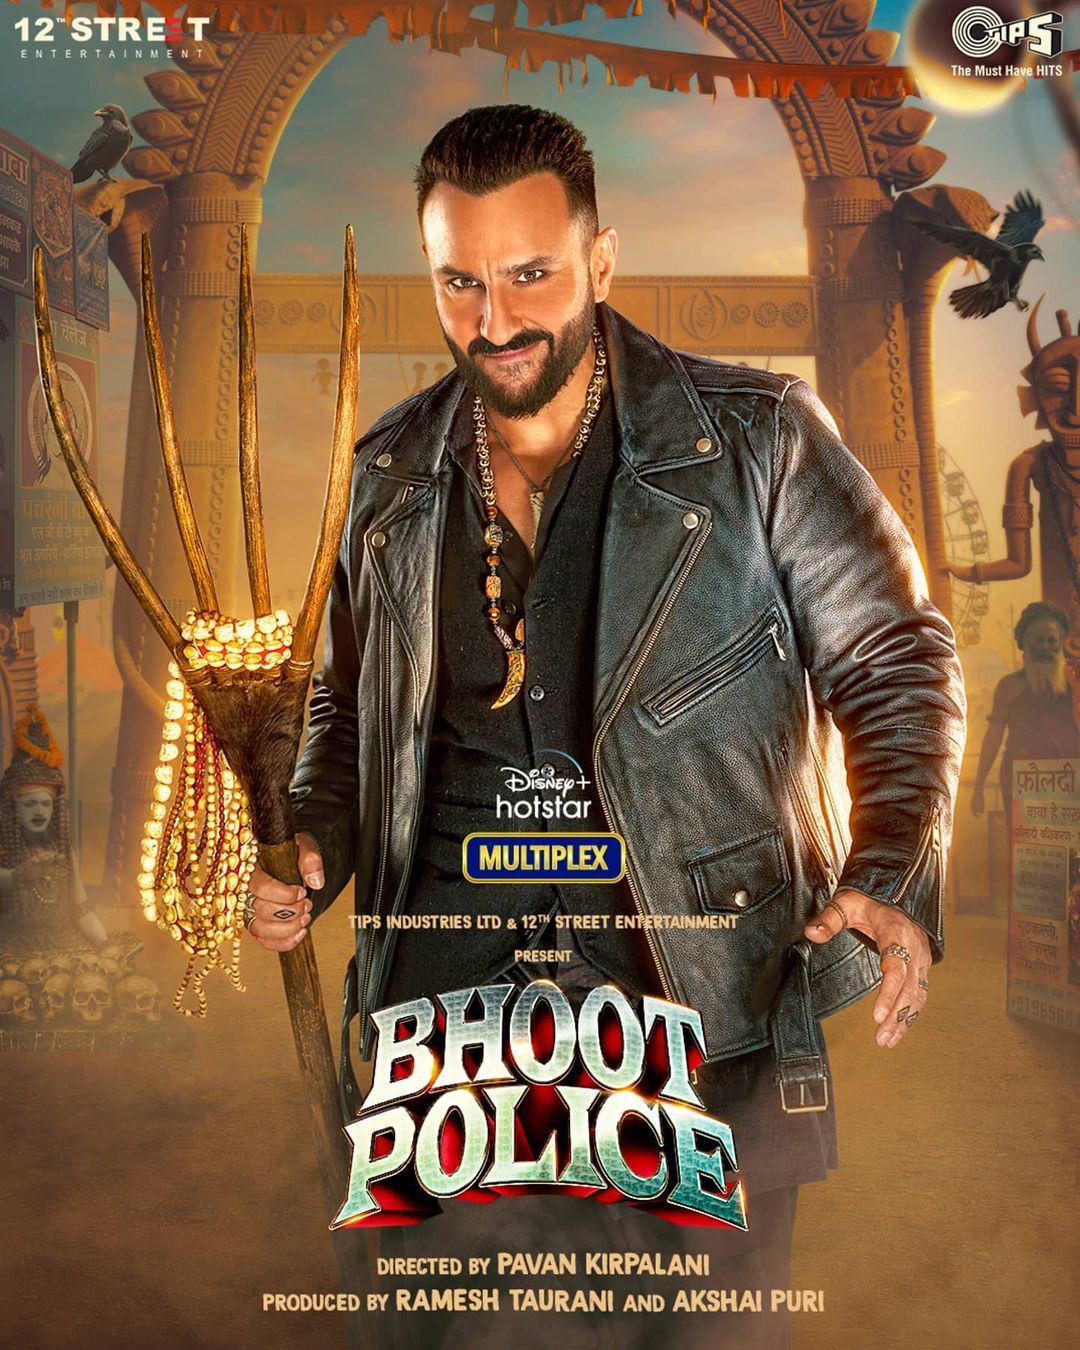 Bhoot Police: Check out Saif Ali Khan’s first look as Vibhooti; film to release on Disney+Hotstar soon